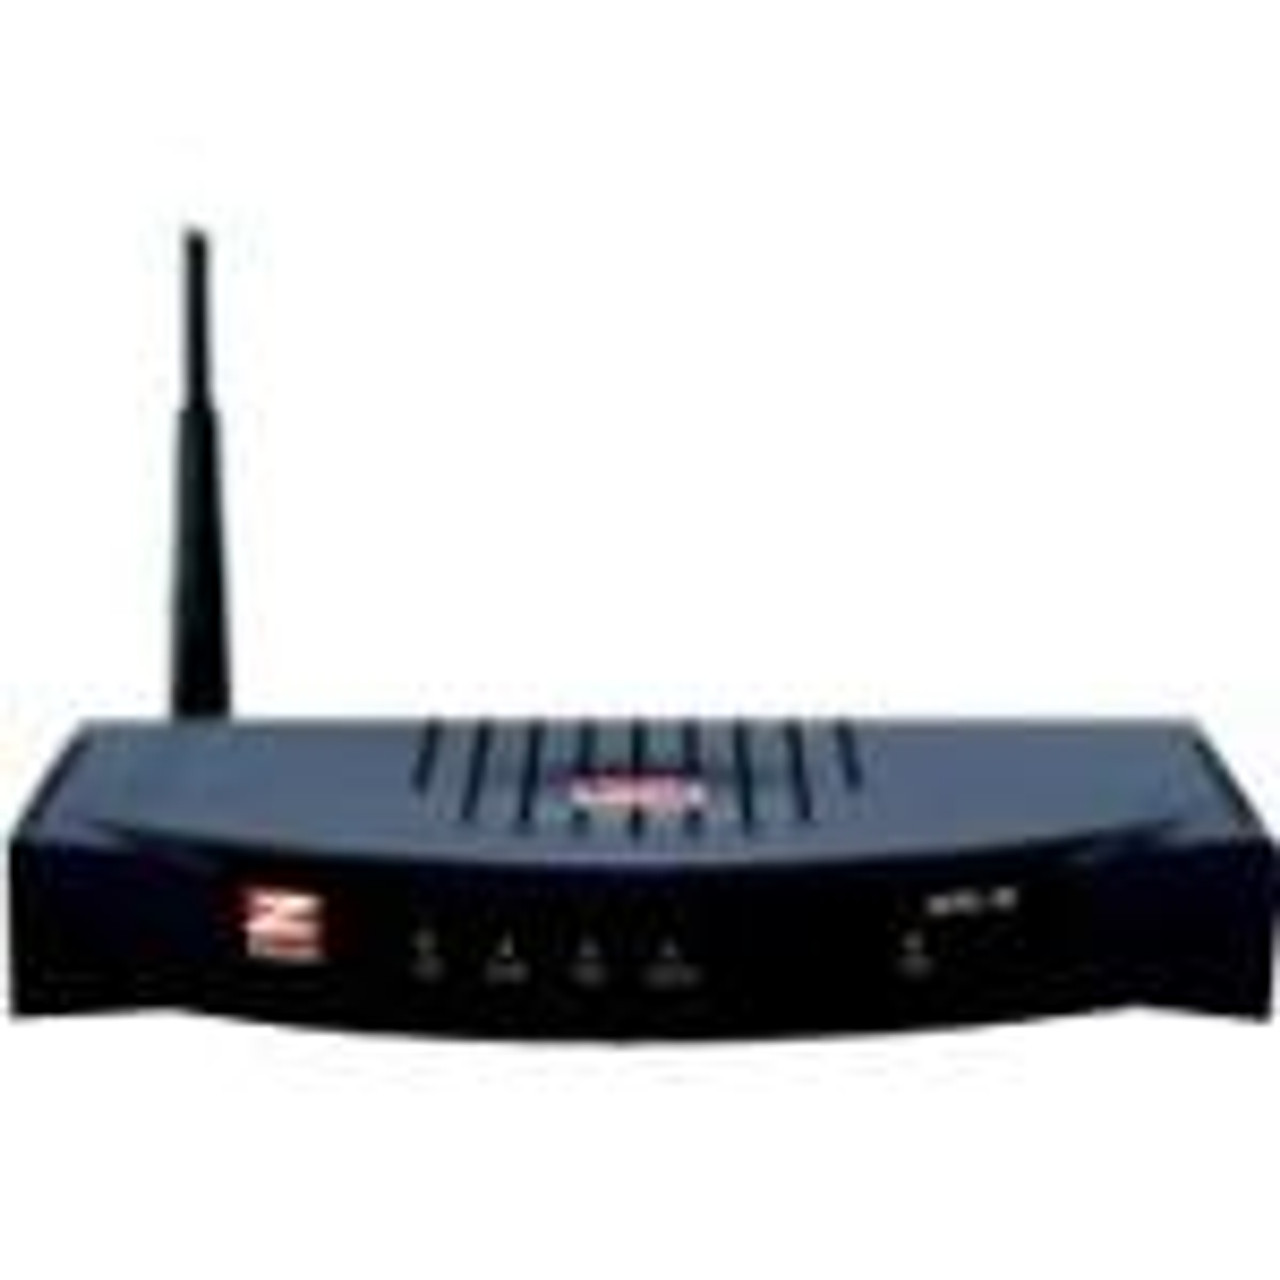 5695-00-00F Zoom 5695 IEEE 802.11b/g 125Mbps 4 x 10/100Base-TX LAN 1 x ADSL WAN 1 x FXS 1 x FXO Wireless Integrated Service Router (Refurbished)